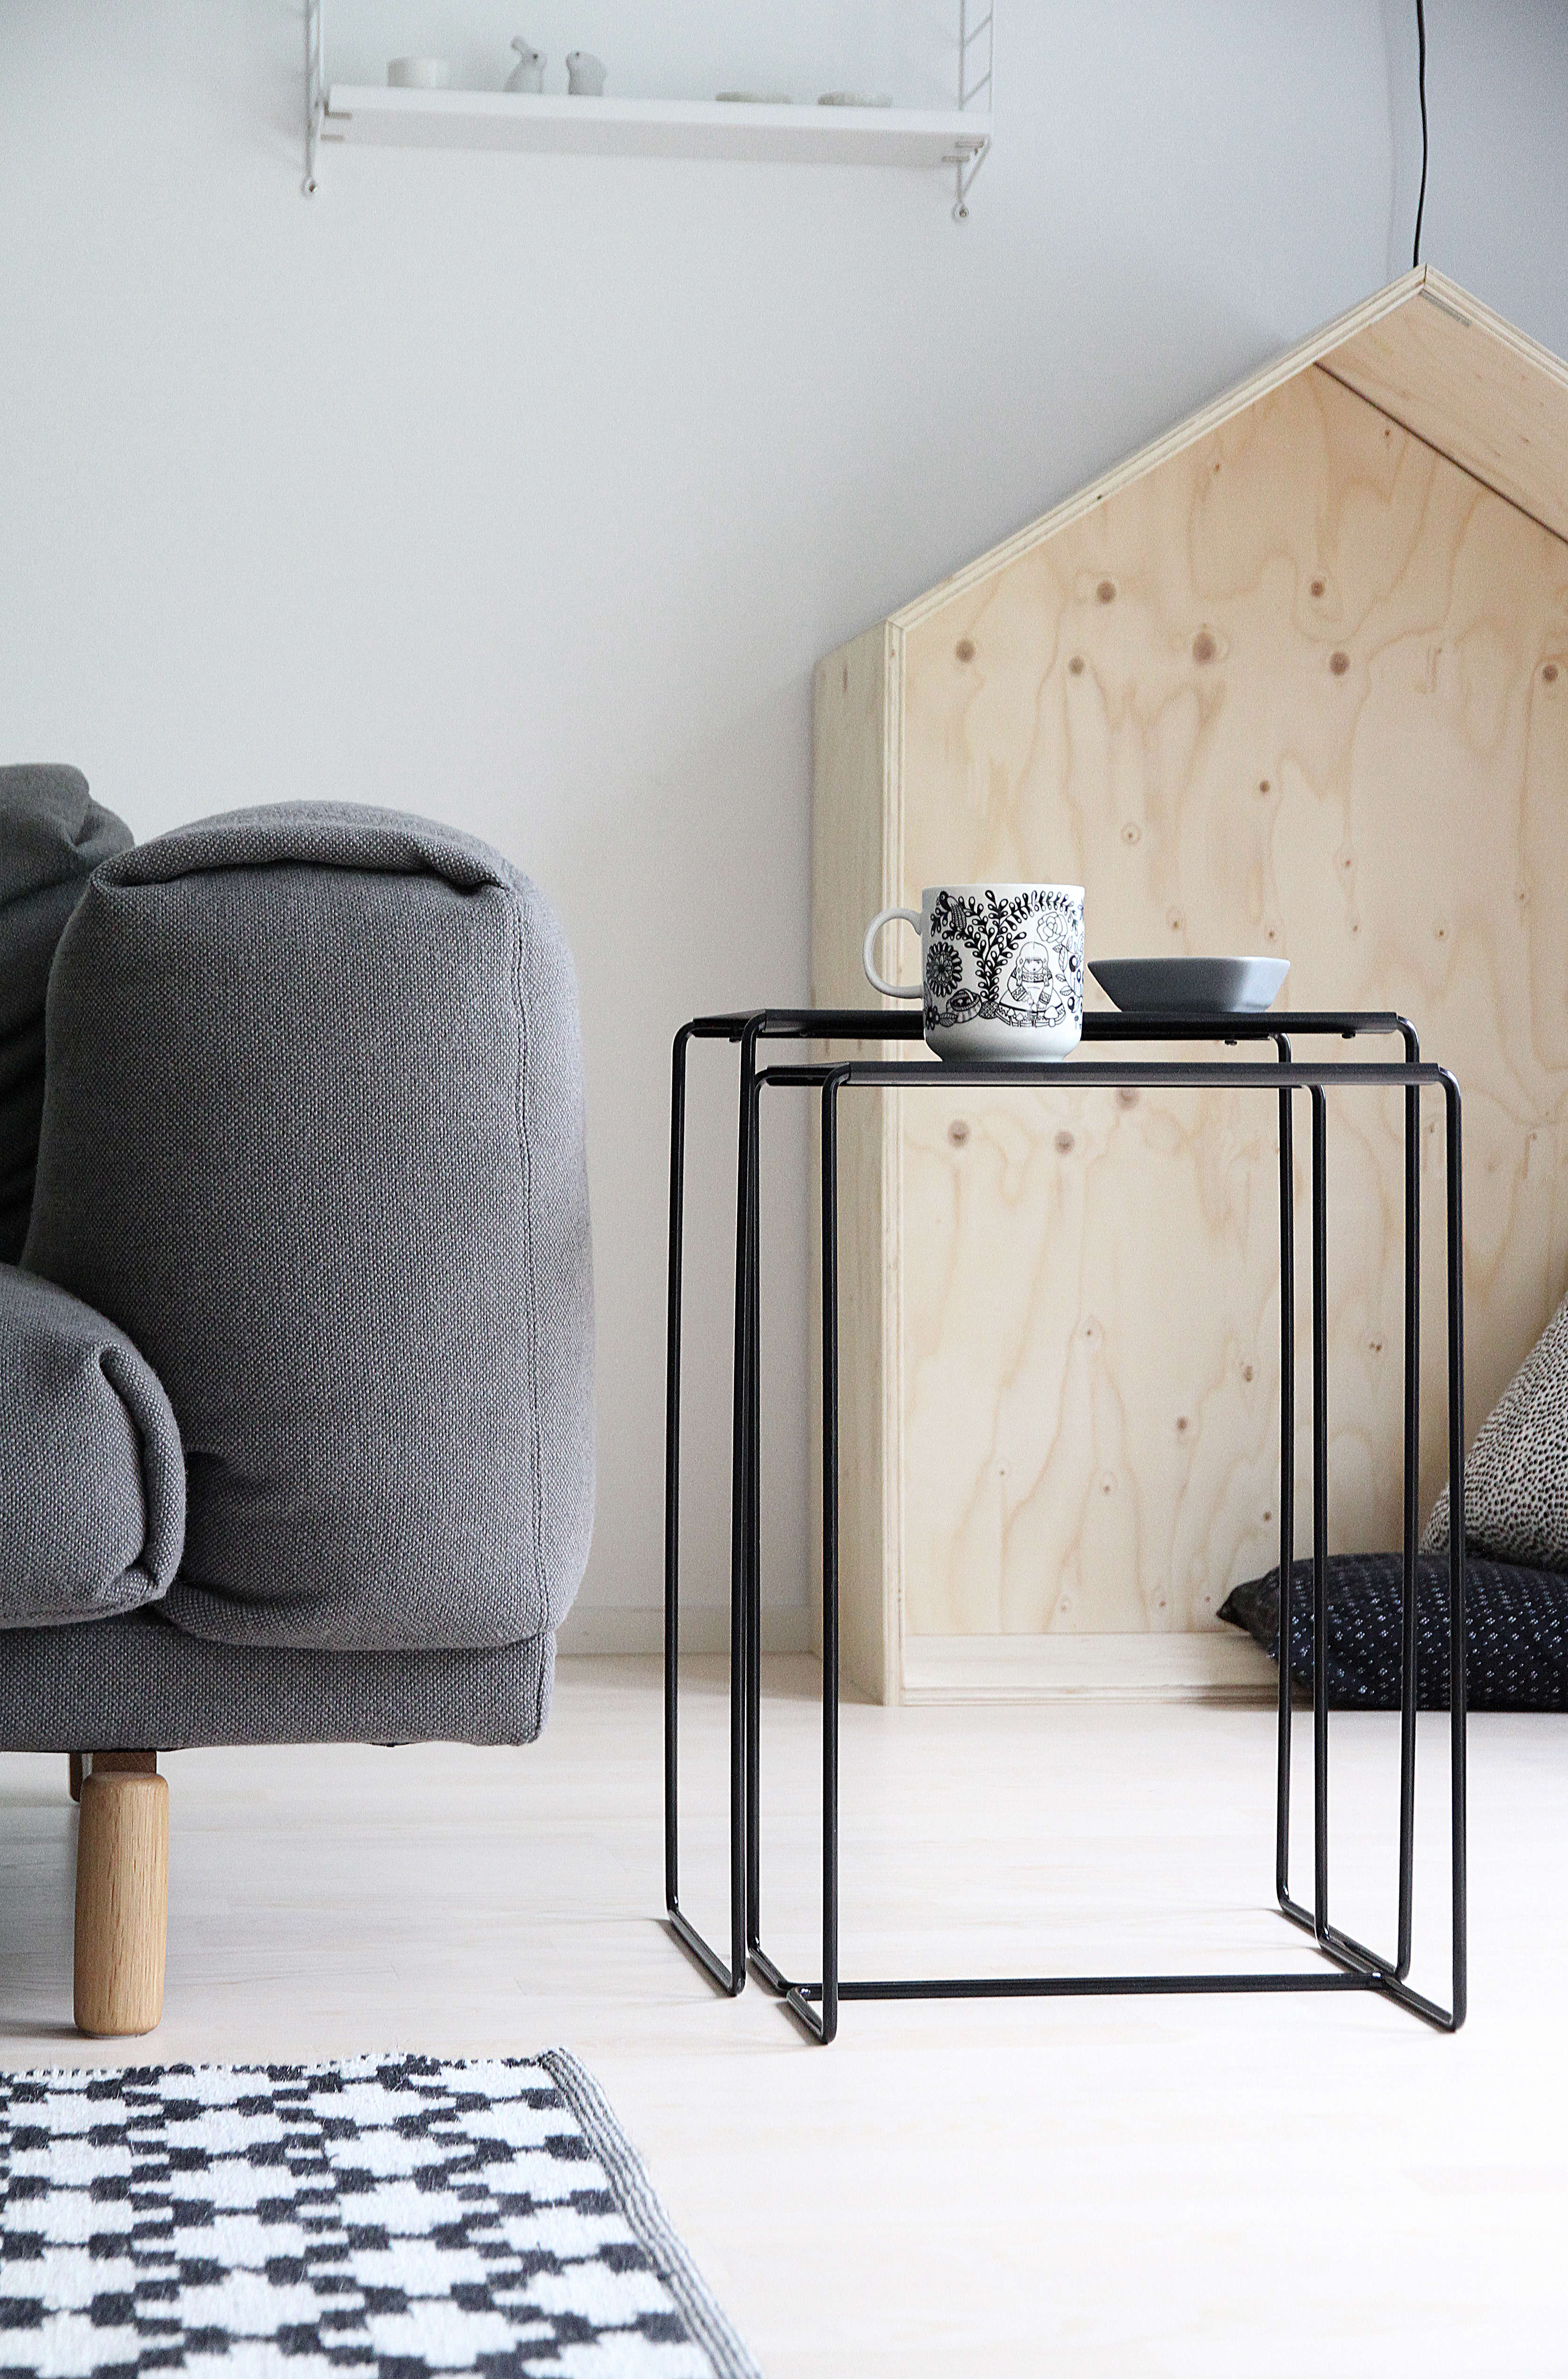 Simple, Sustainable Storage from Everyday Design, Finland